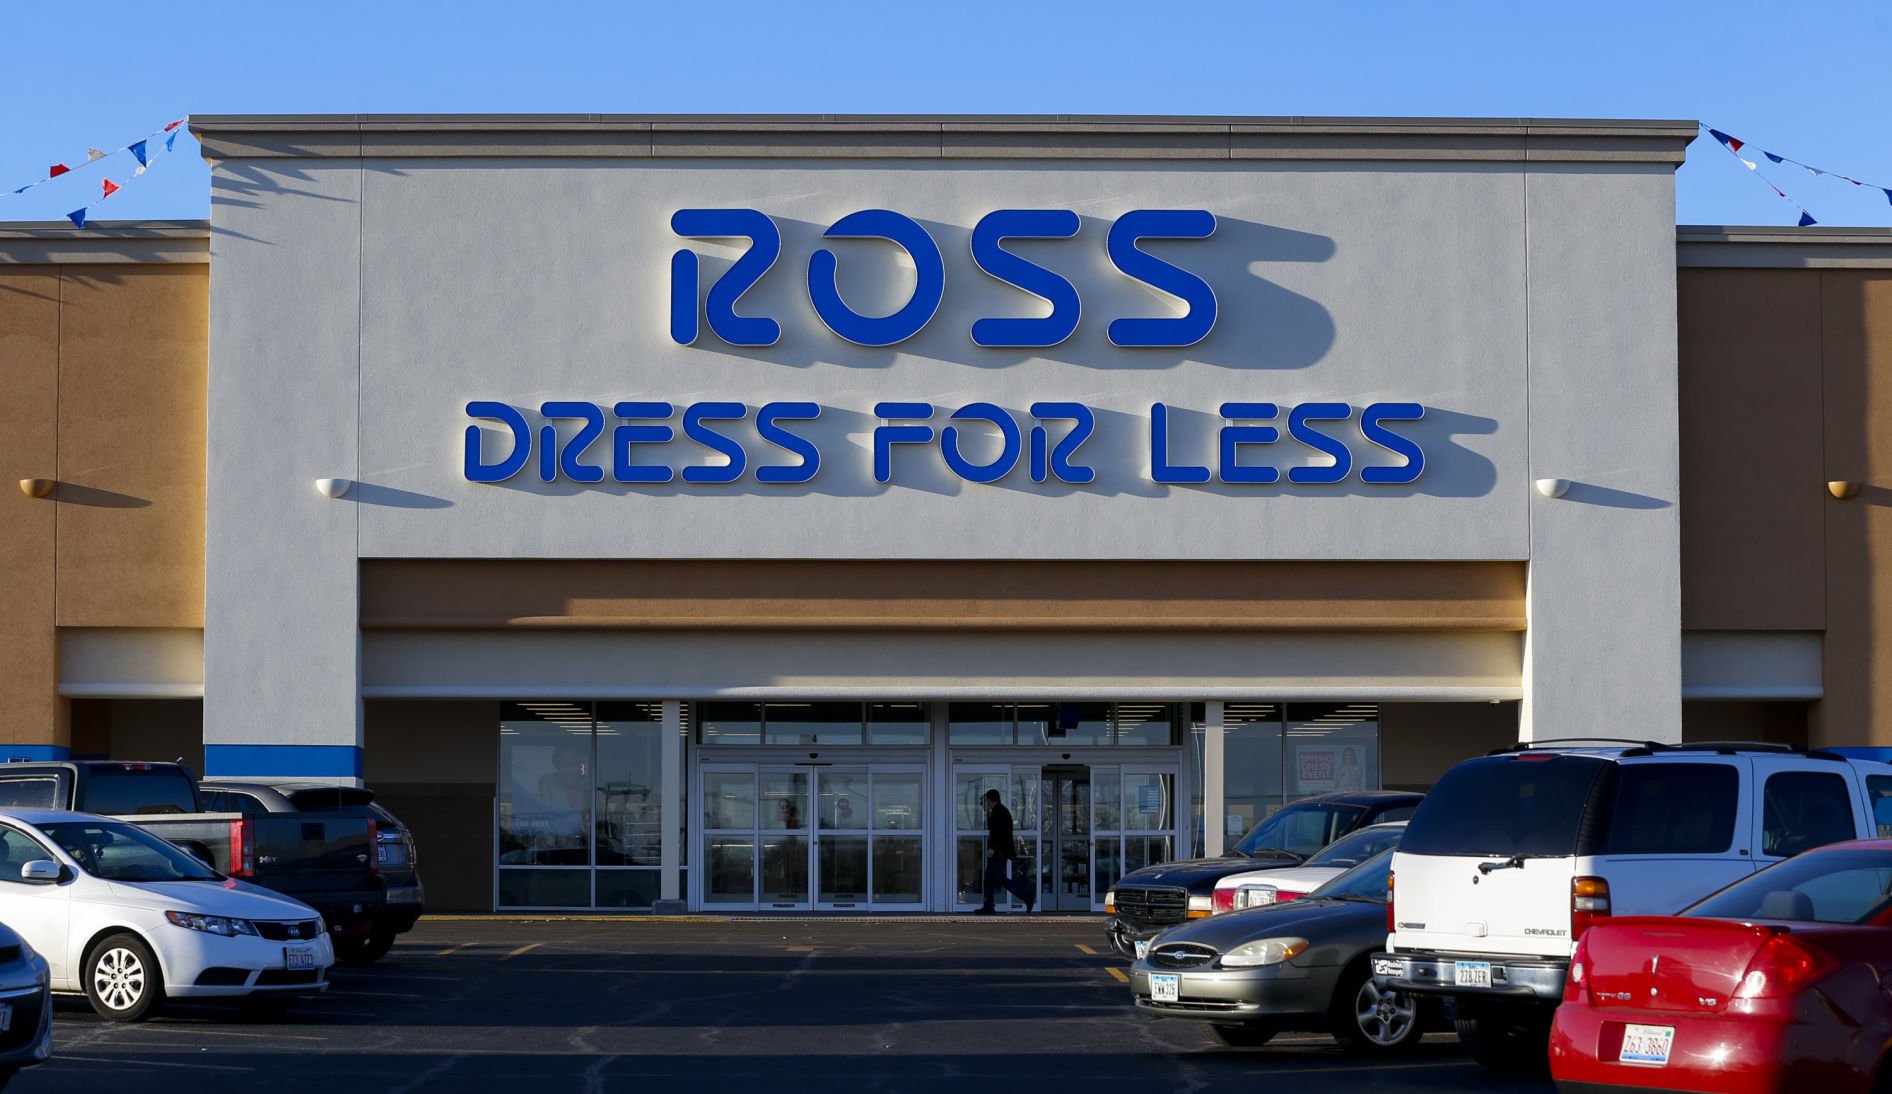 buy \u003e ross store hours sunday, Up to 61 